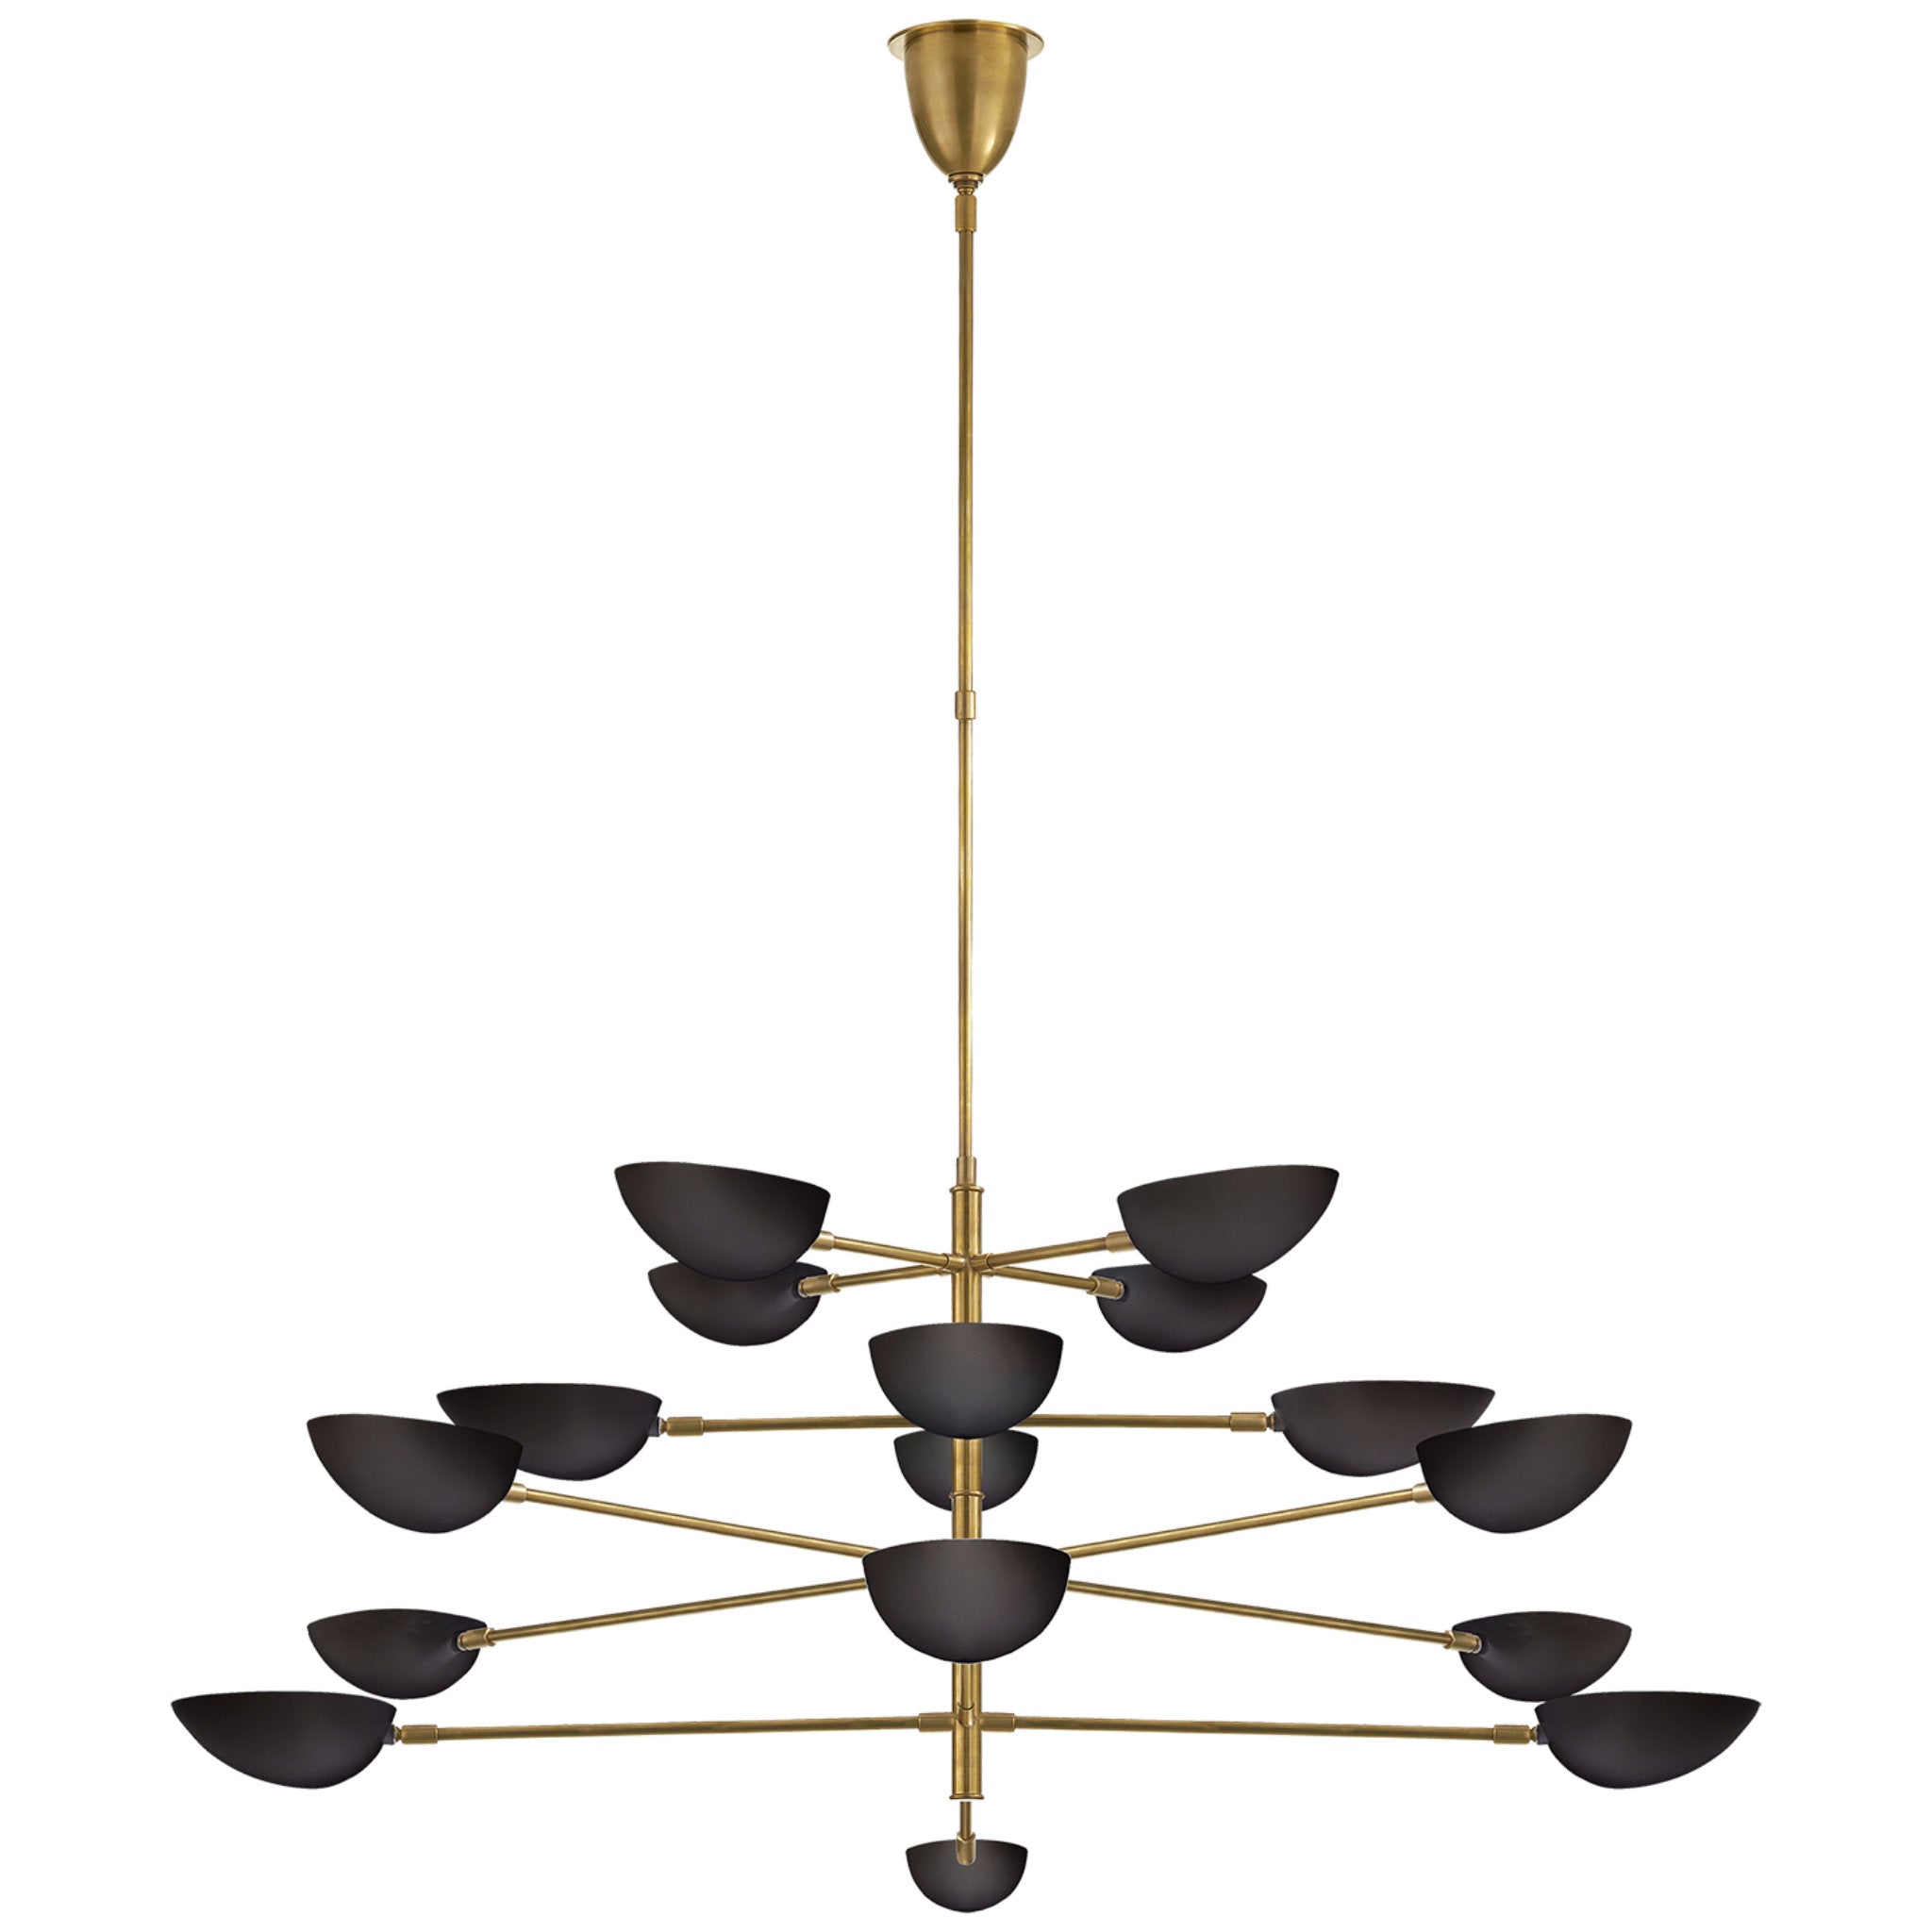 AERIN Graphic Grande Four-Tier Chandelier in Hand-Rubbed Antique Brass with Black Shades